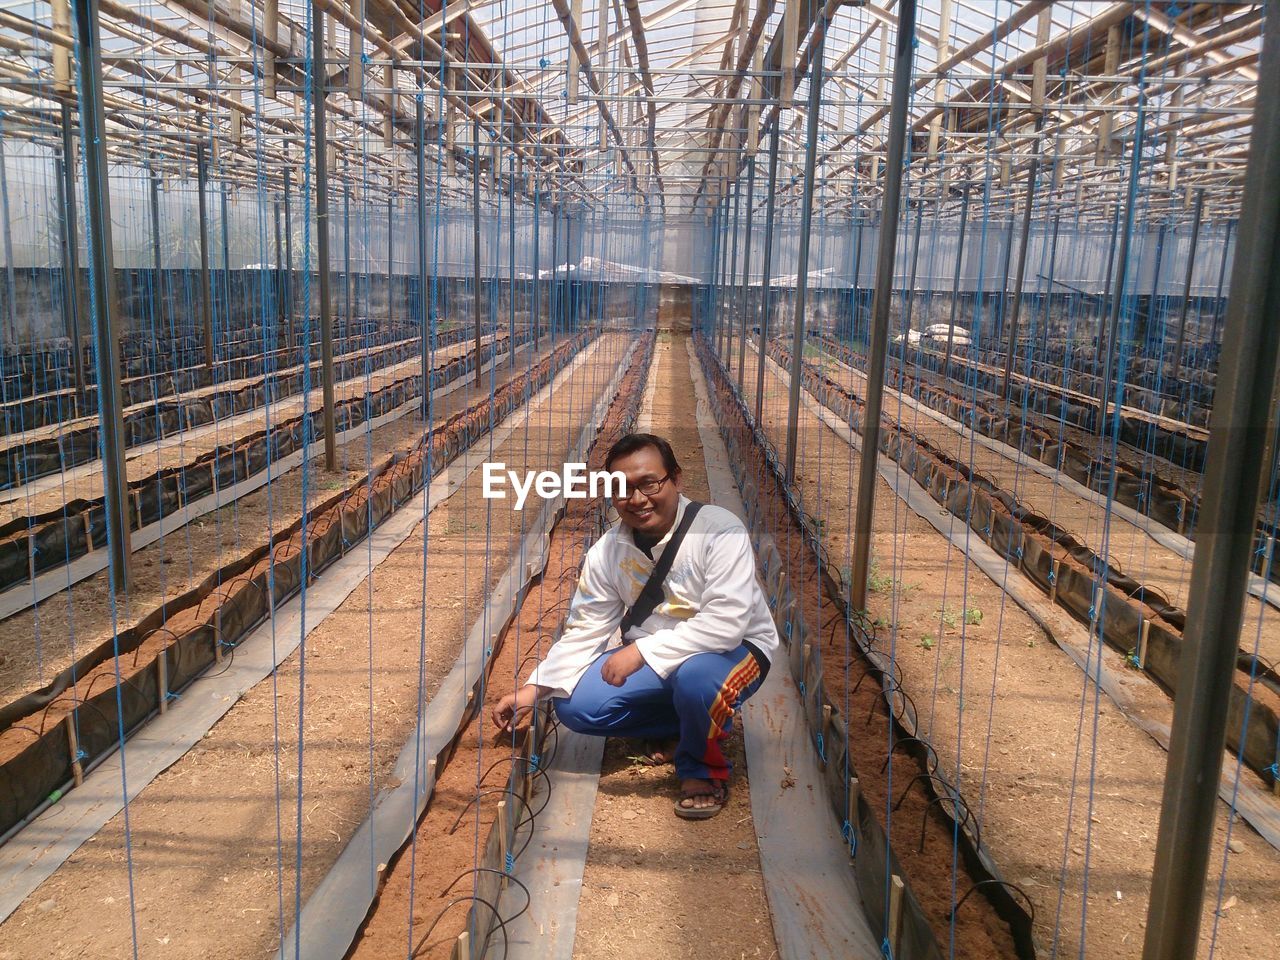 Portrait of smiling man crouching in greenhouse